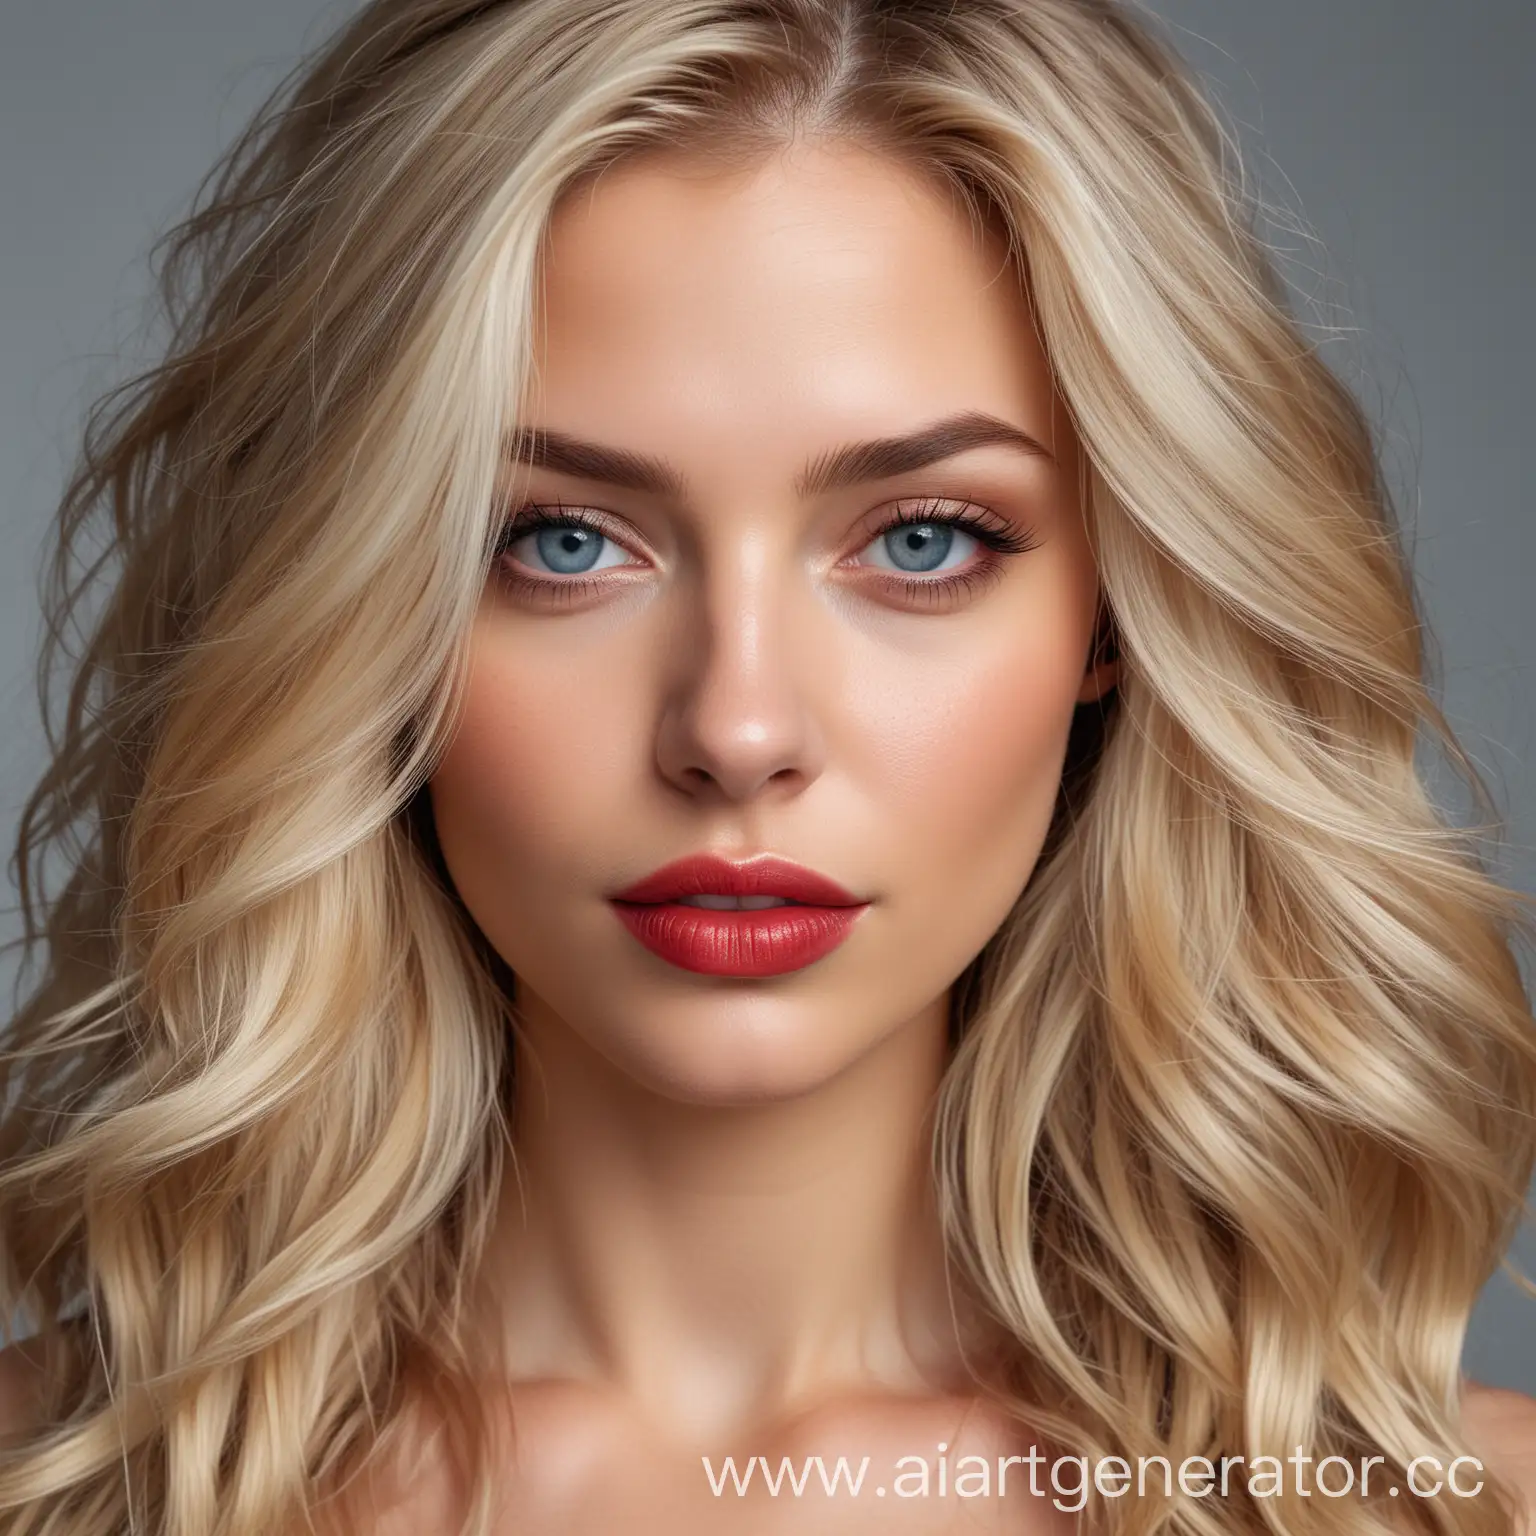 Realistic photo from head to shoulders of a 25 year old lady with voluminous flowing blonde hair with red highlights, deep diamond blue eyes, confident intense look, light red sexy lips, present attitude looking at me. No makeup. Slight smile. She is charming. 